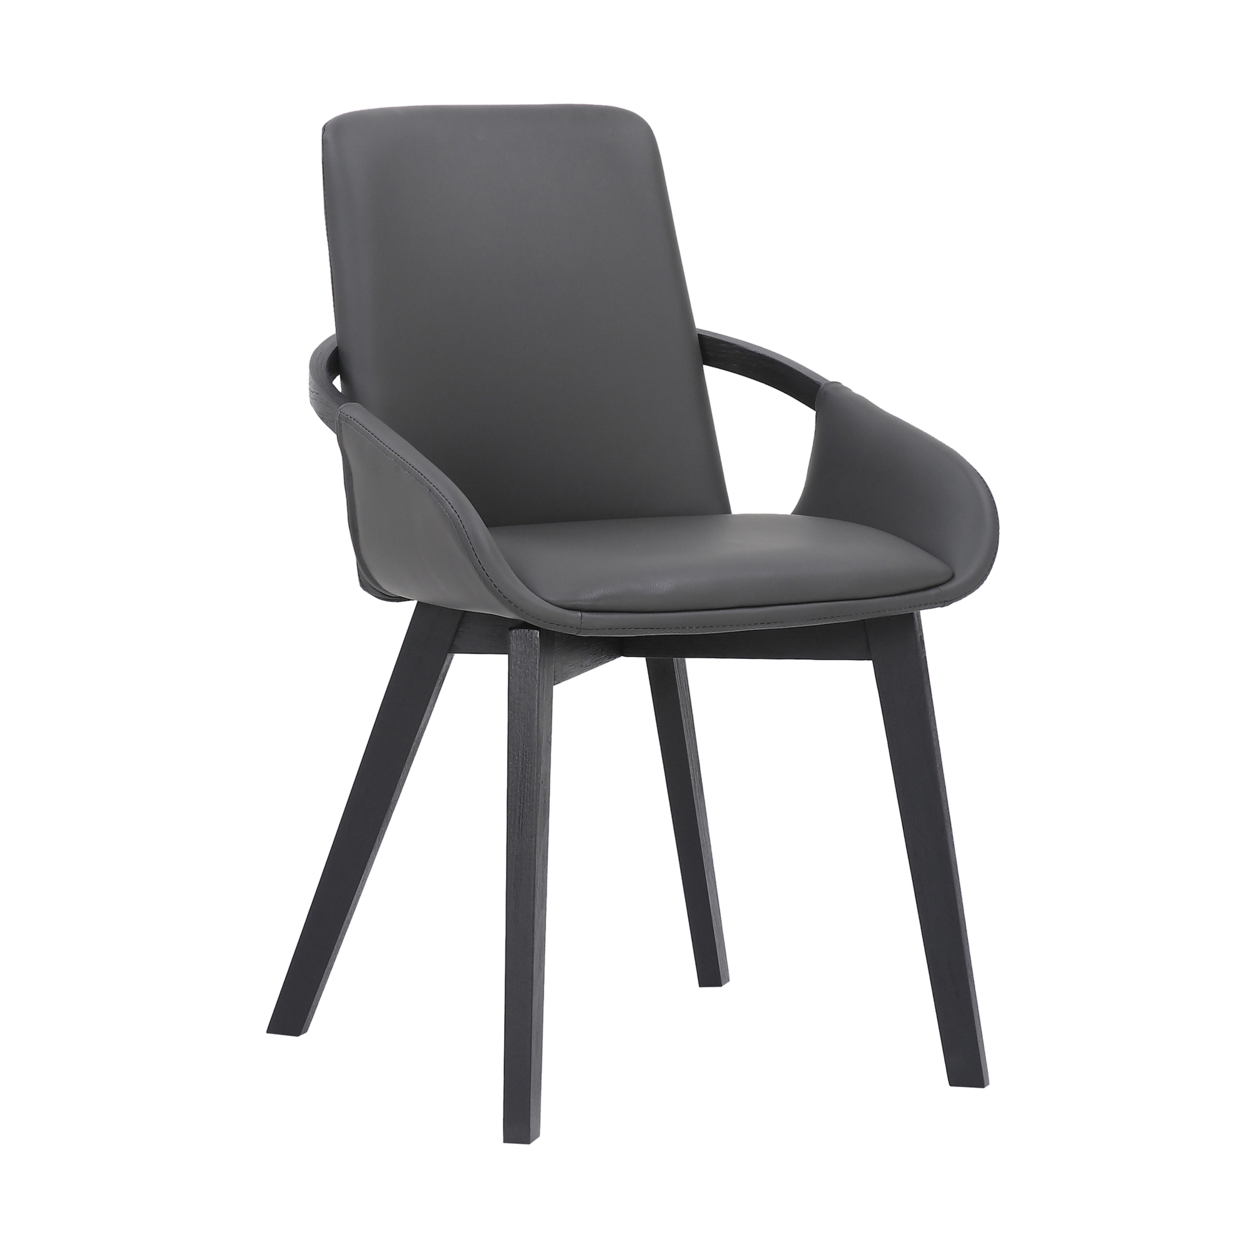 19 Inches Leatherette Dining Chair With Bucket Seat, Black- Saltoro Sherpi